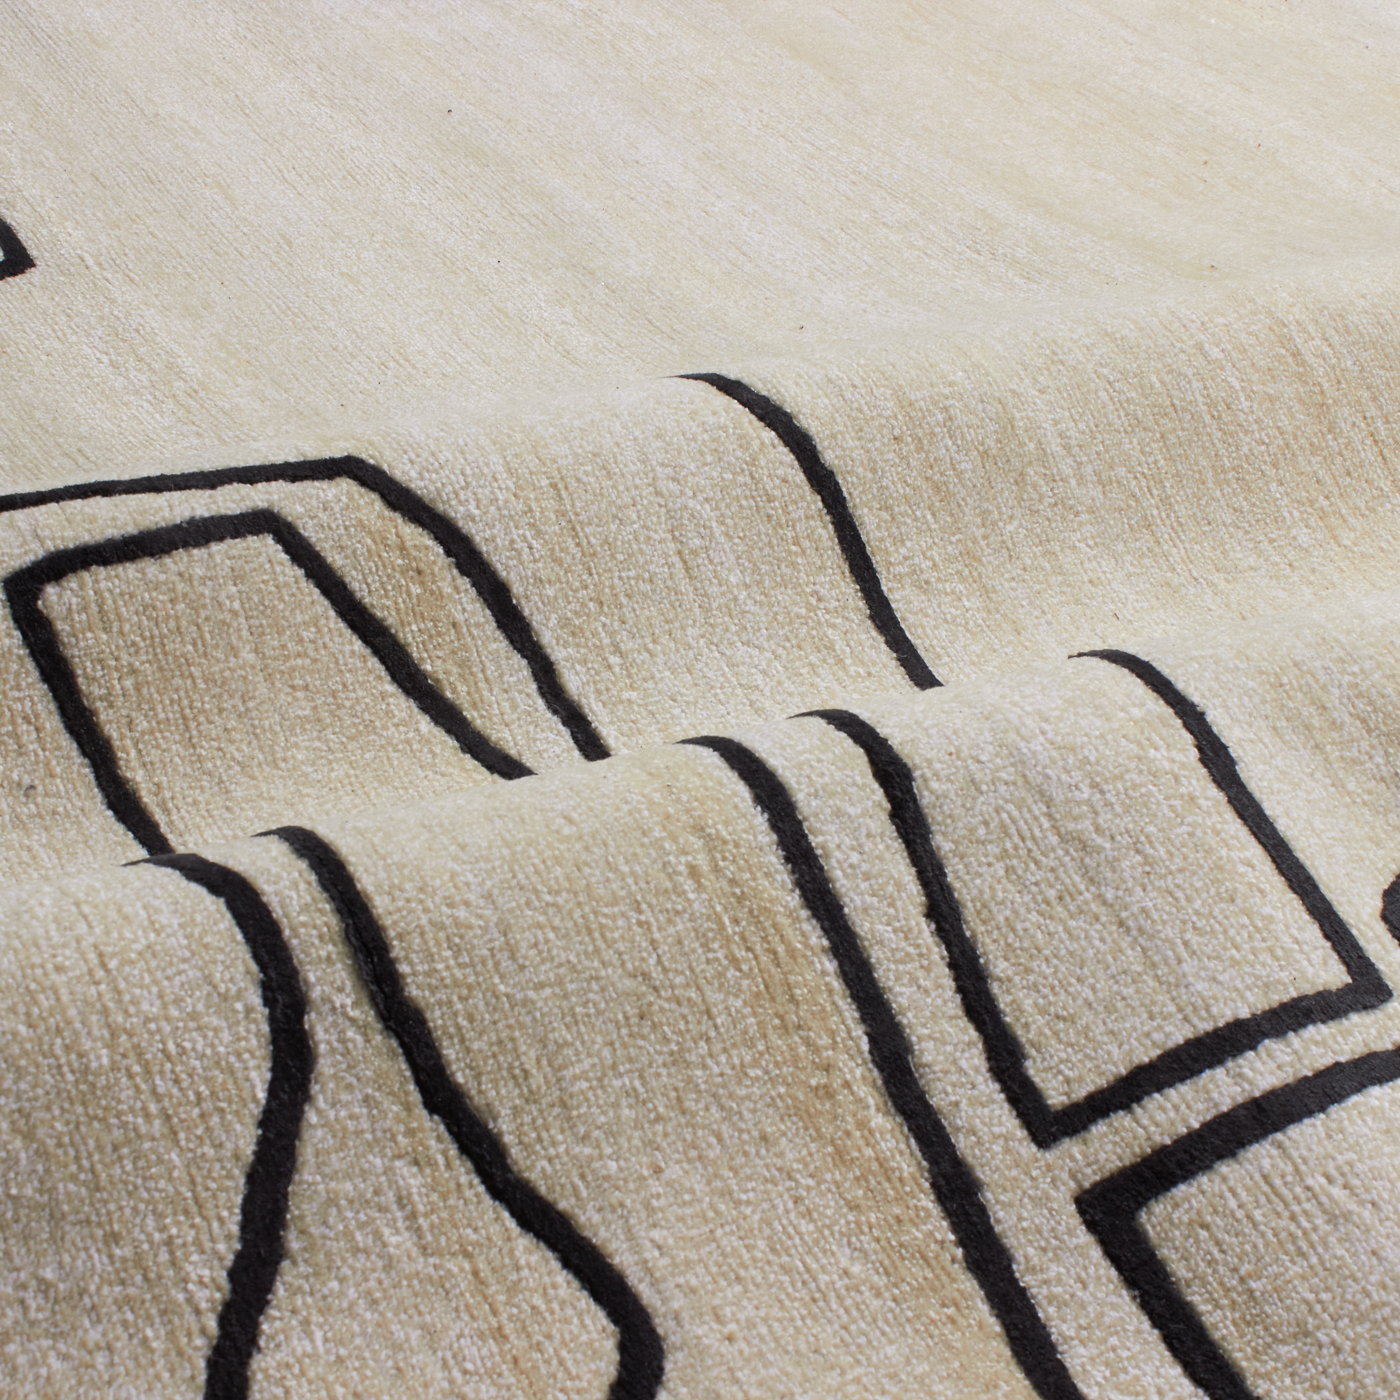 Inspired by works of Spanish Modernist sculpture, the Spanish Sculpture Collection explores geometric and abstract forms within the constructs of a rug.